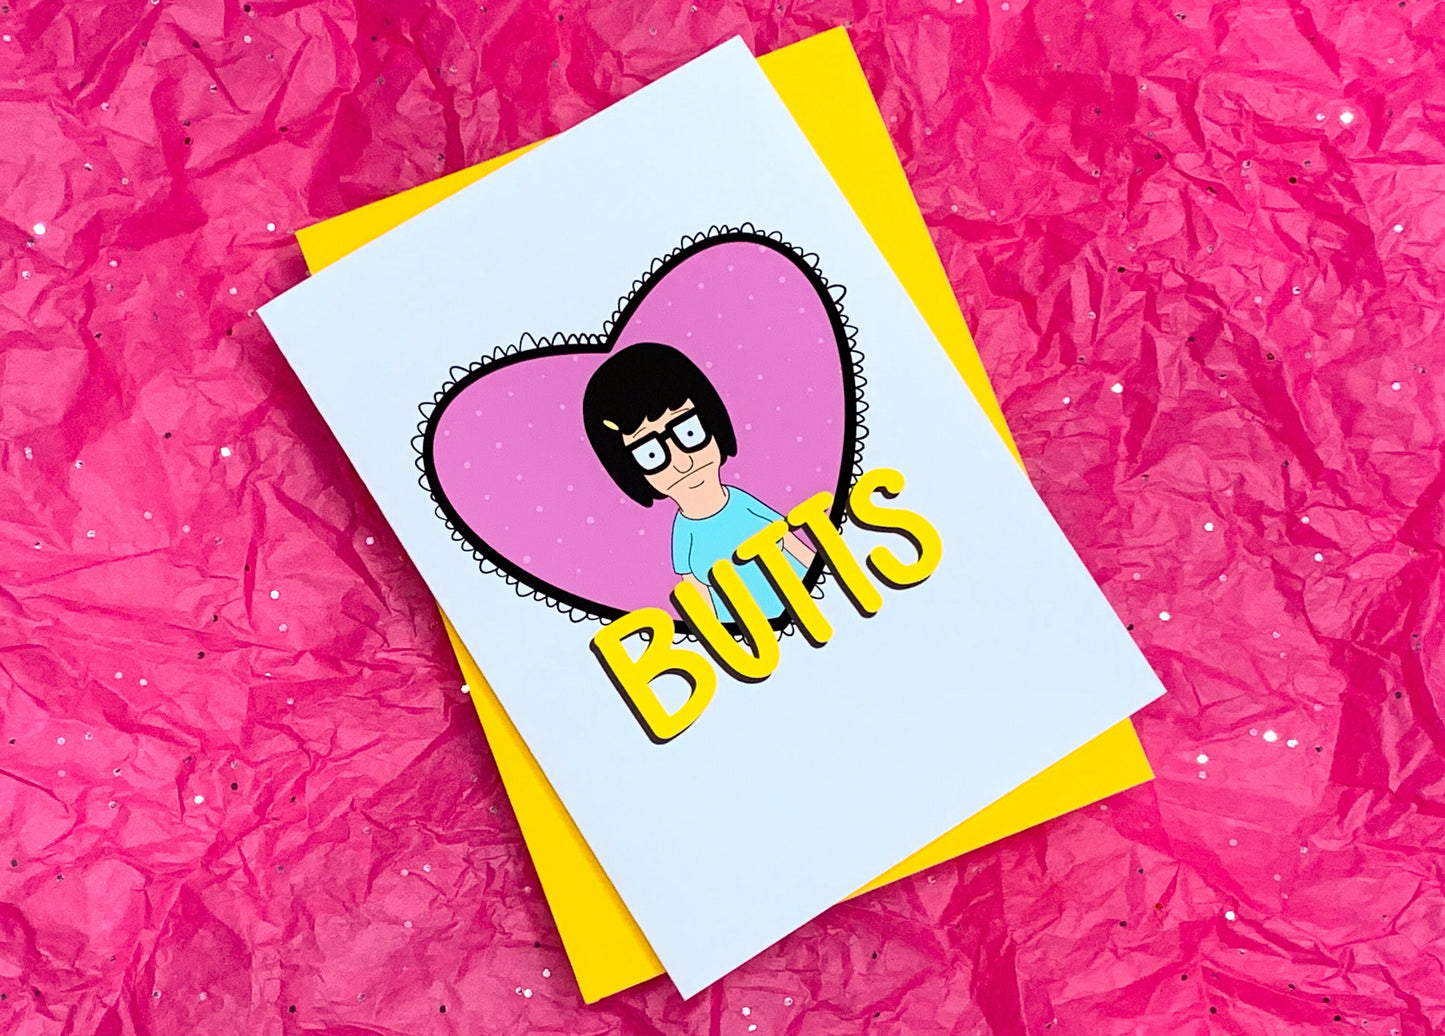 Tina Butts Bob's Burger's-Inspired Valentine's Day Card by StoneDonut Design